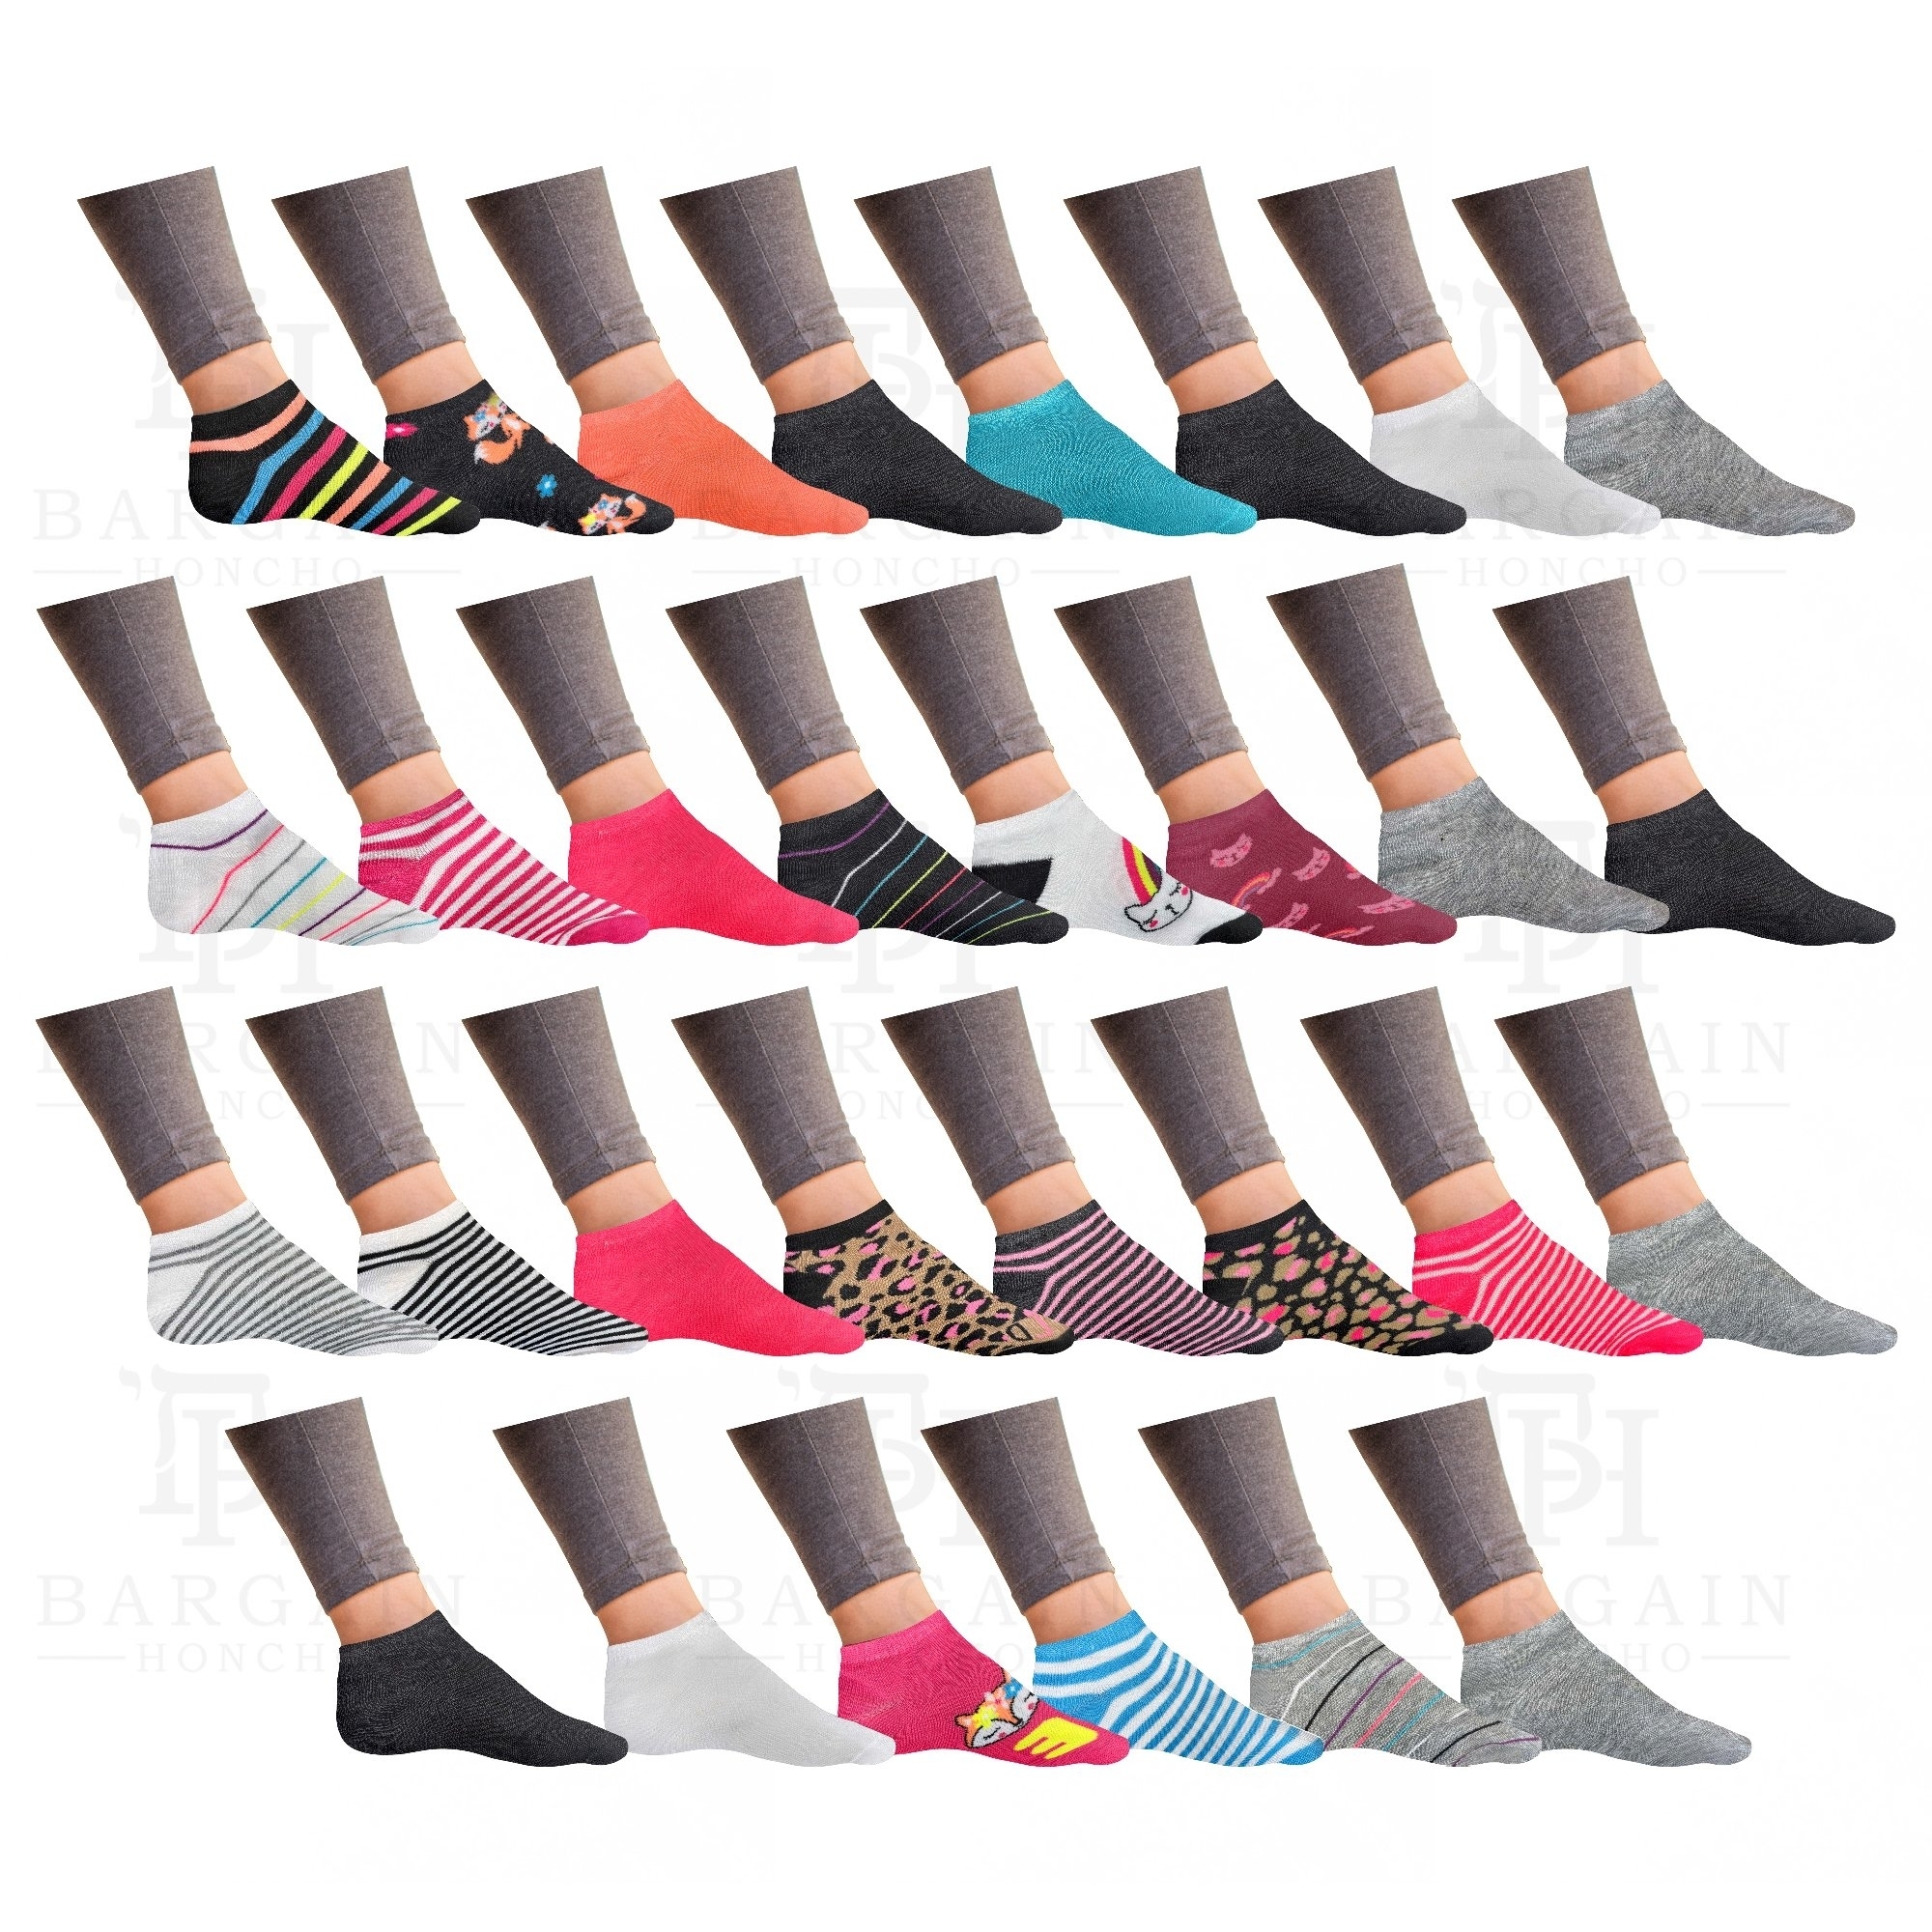 10-Pair: Women’s Breathable Fun Funky Comfortable Colorful No Show Low Cut Ankle Socks - 10-Pairs